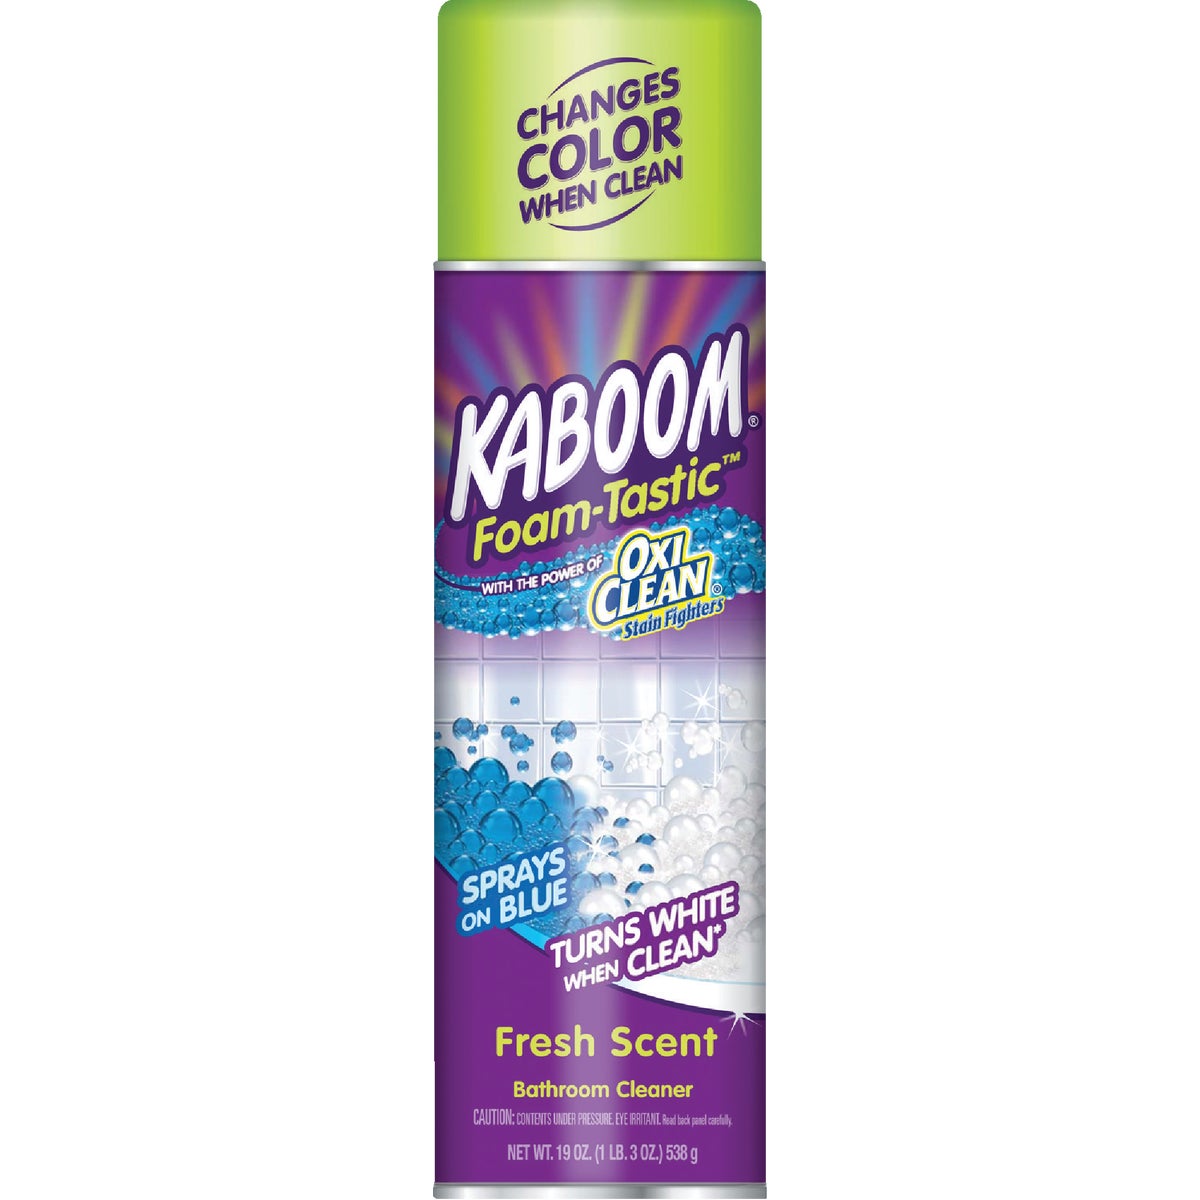 Item 620411, Kaboom Foam-Tastic with OxiClean stain fighters.